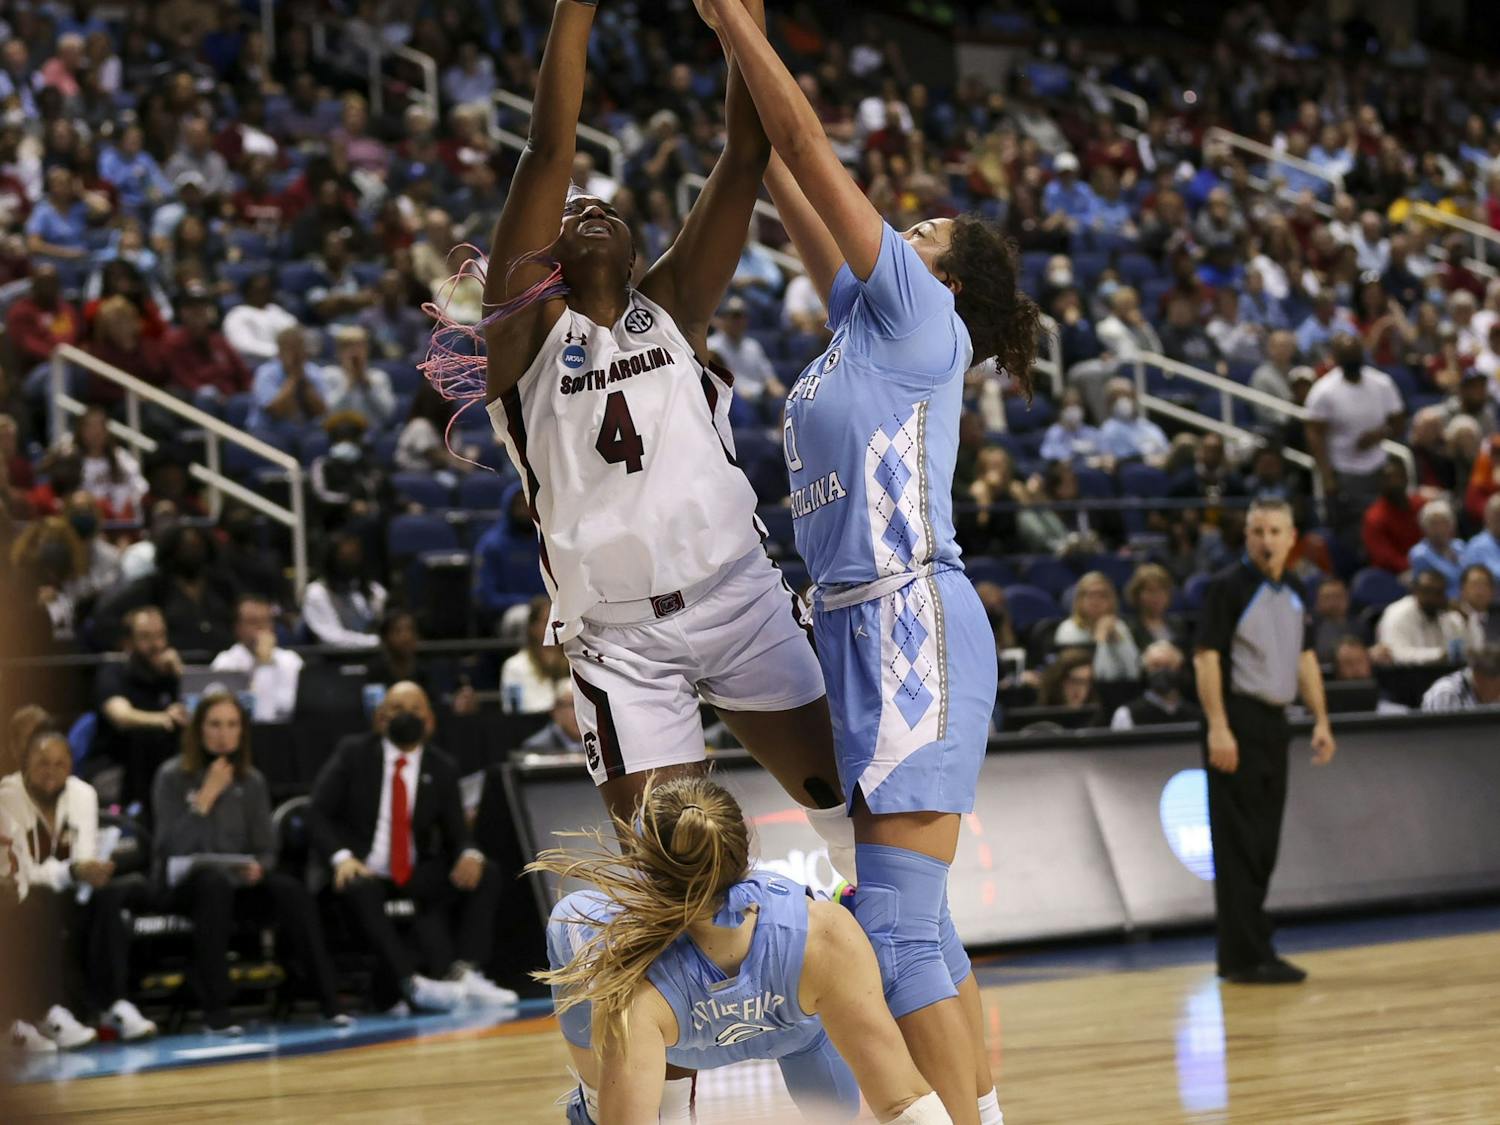 Junior forward Aliyah Boston shoots a layup during the fourth quarter of South Carolina's 69-61 victory over North Carolina in the Sweet Sixteen on March 25, 2022.